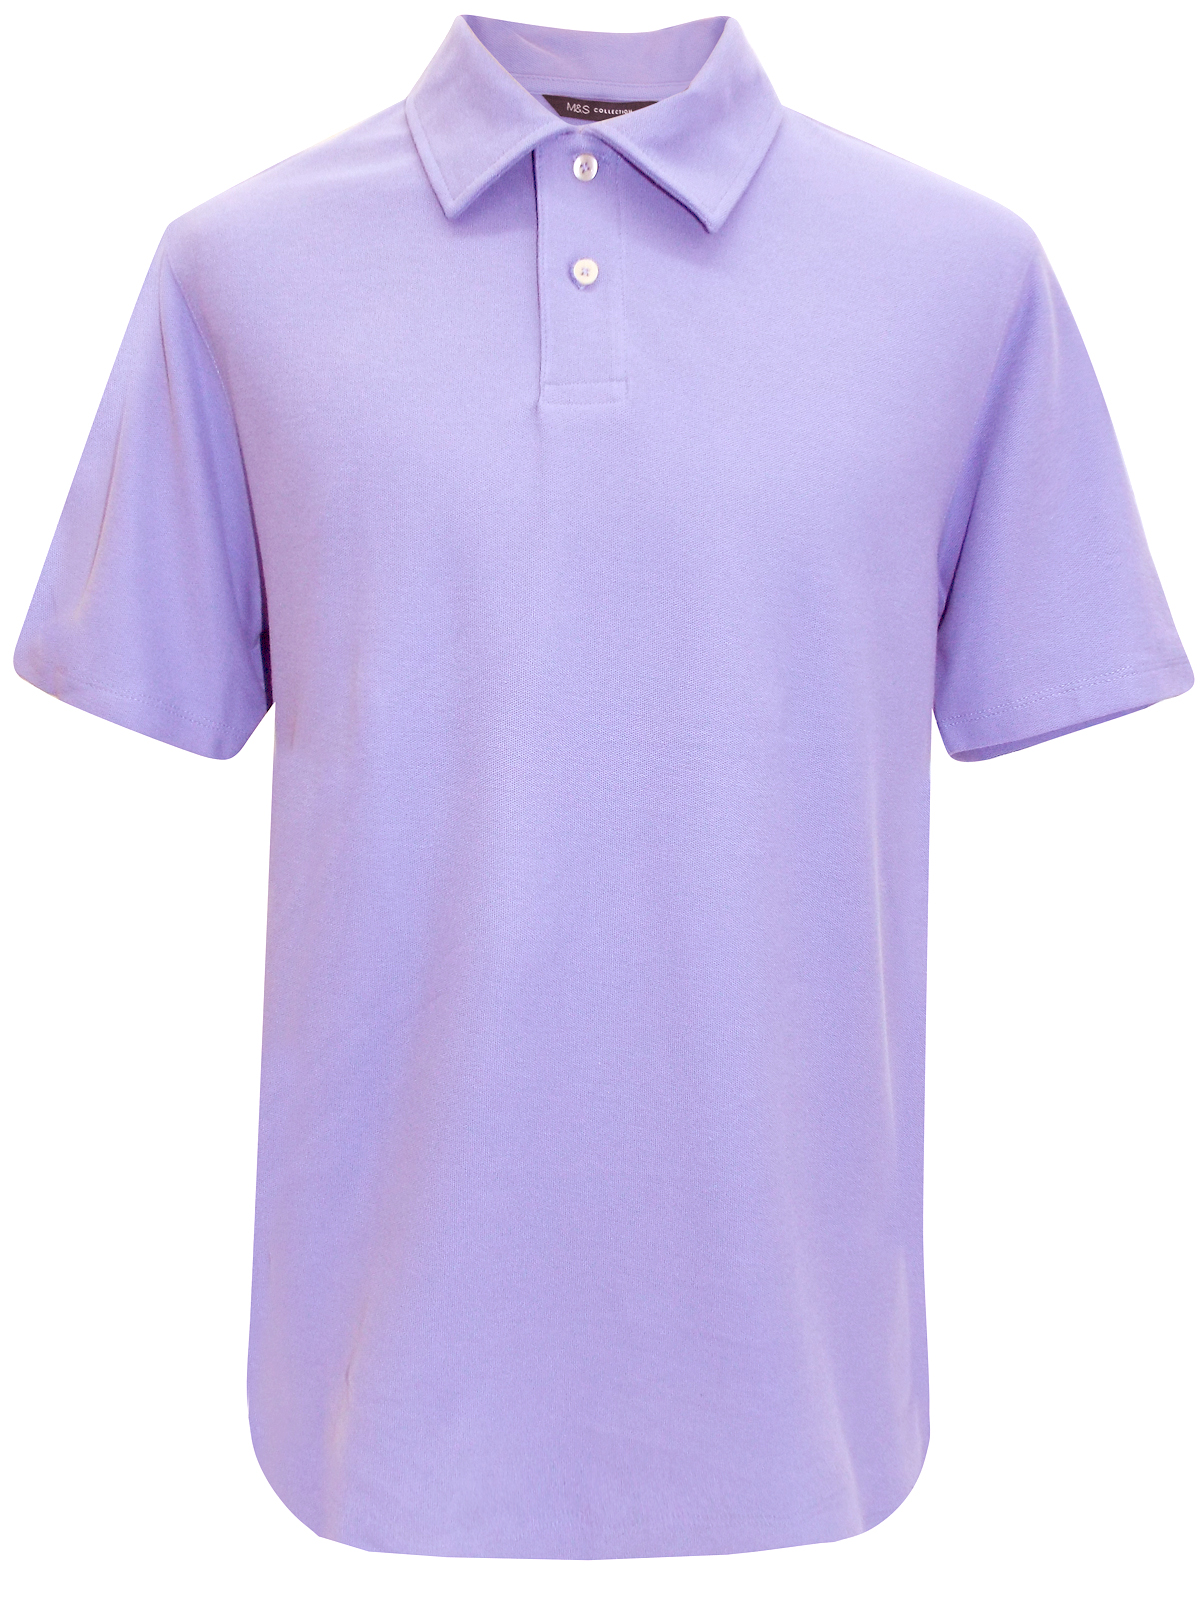 Marks And Spencer Mand5 Lilac Pure Cotton Polo Shirt Size Medium To Xlarge 